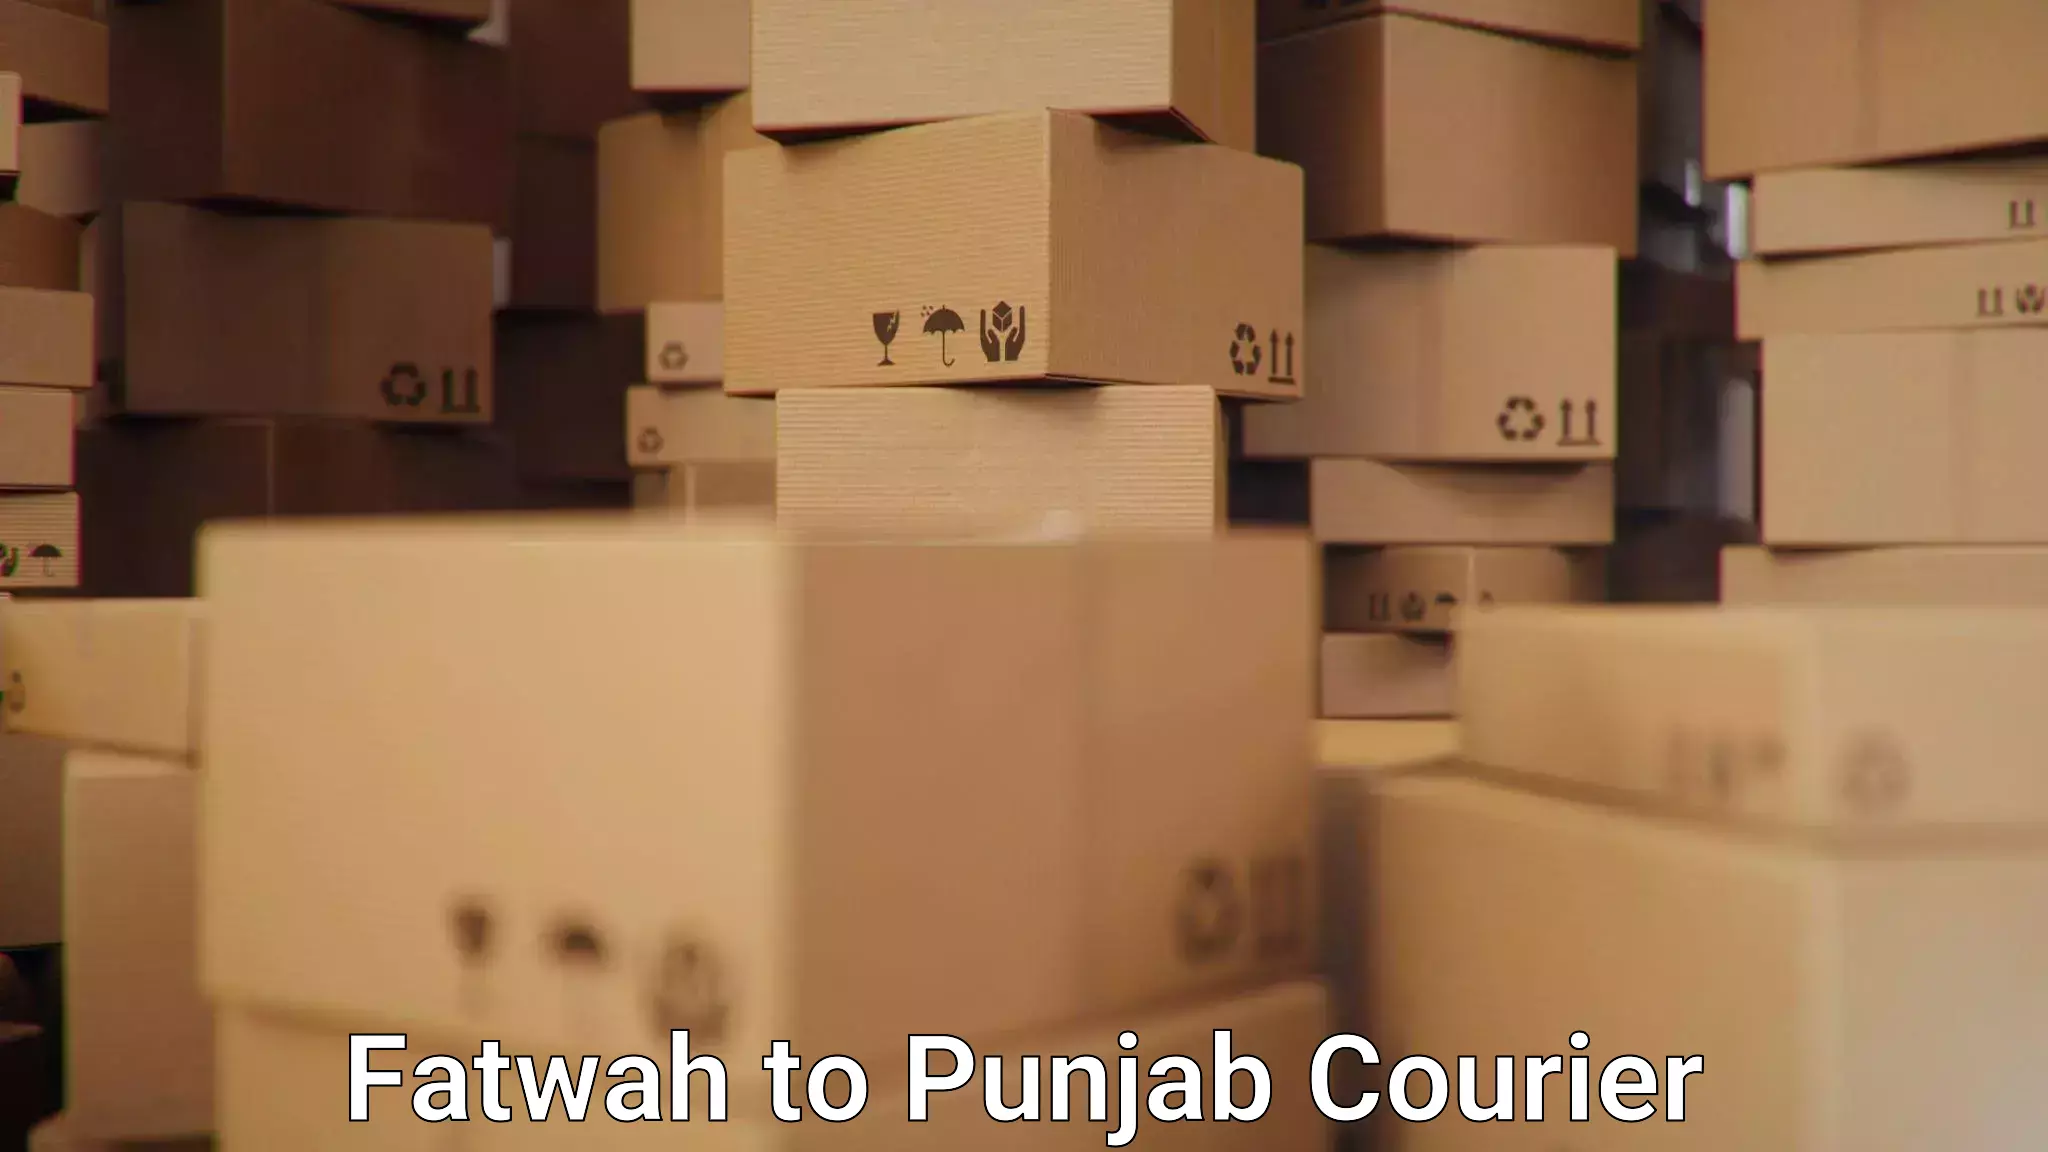 Next-day freight services in Fatwah to Punjab